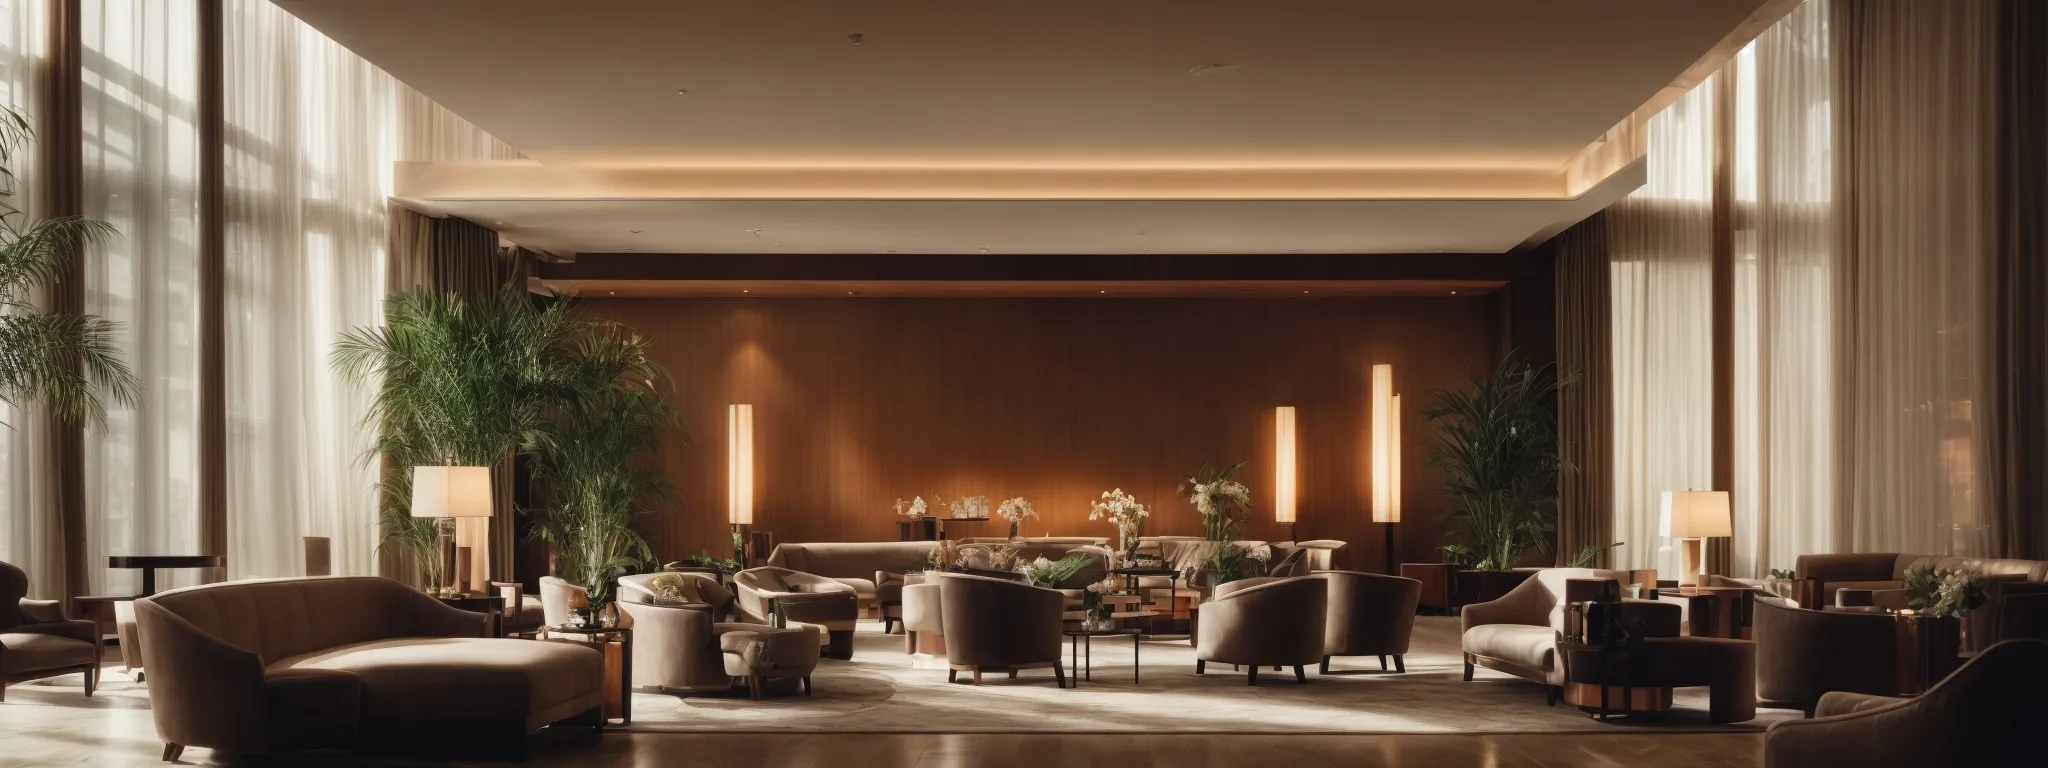 a luxurious hotel lobby bathed in natural light with plush seating and an inviting ambiance.